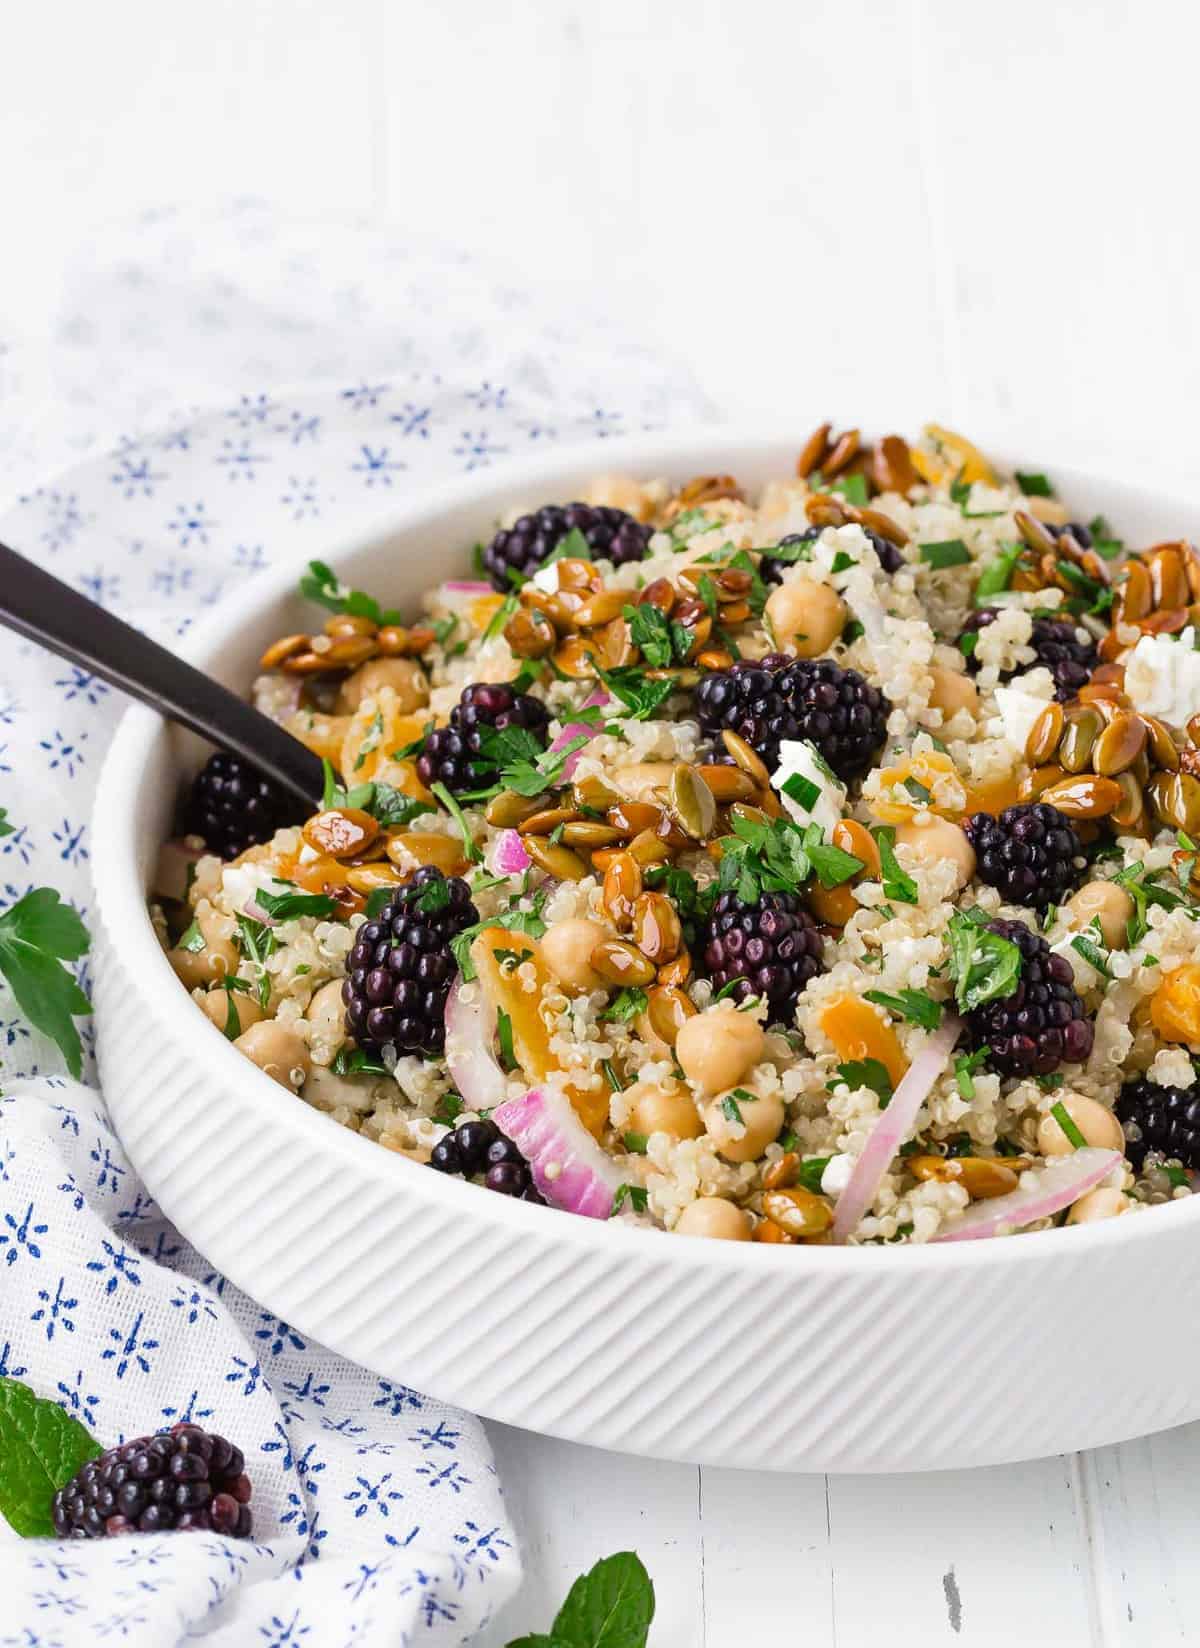 Colorful quinoa salad in a white bowl with a black spoon.